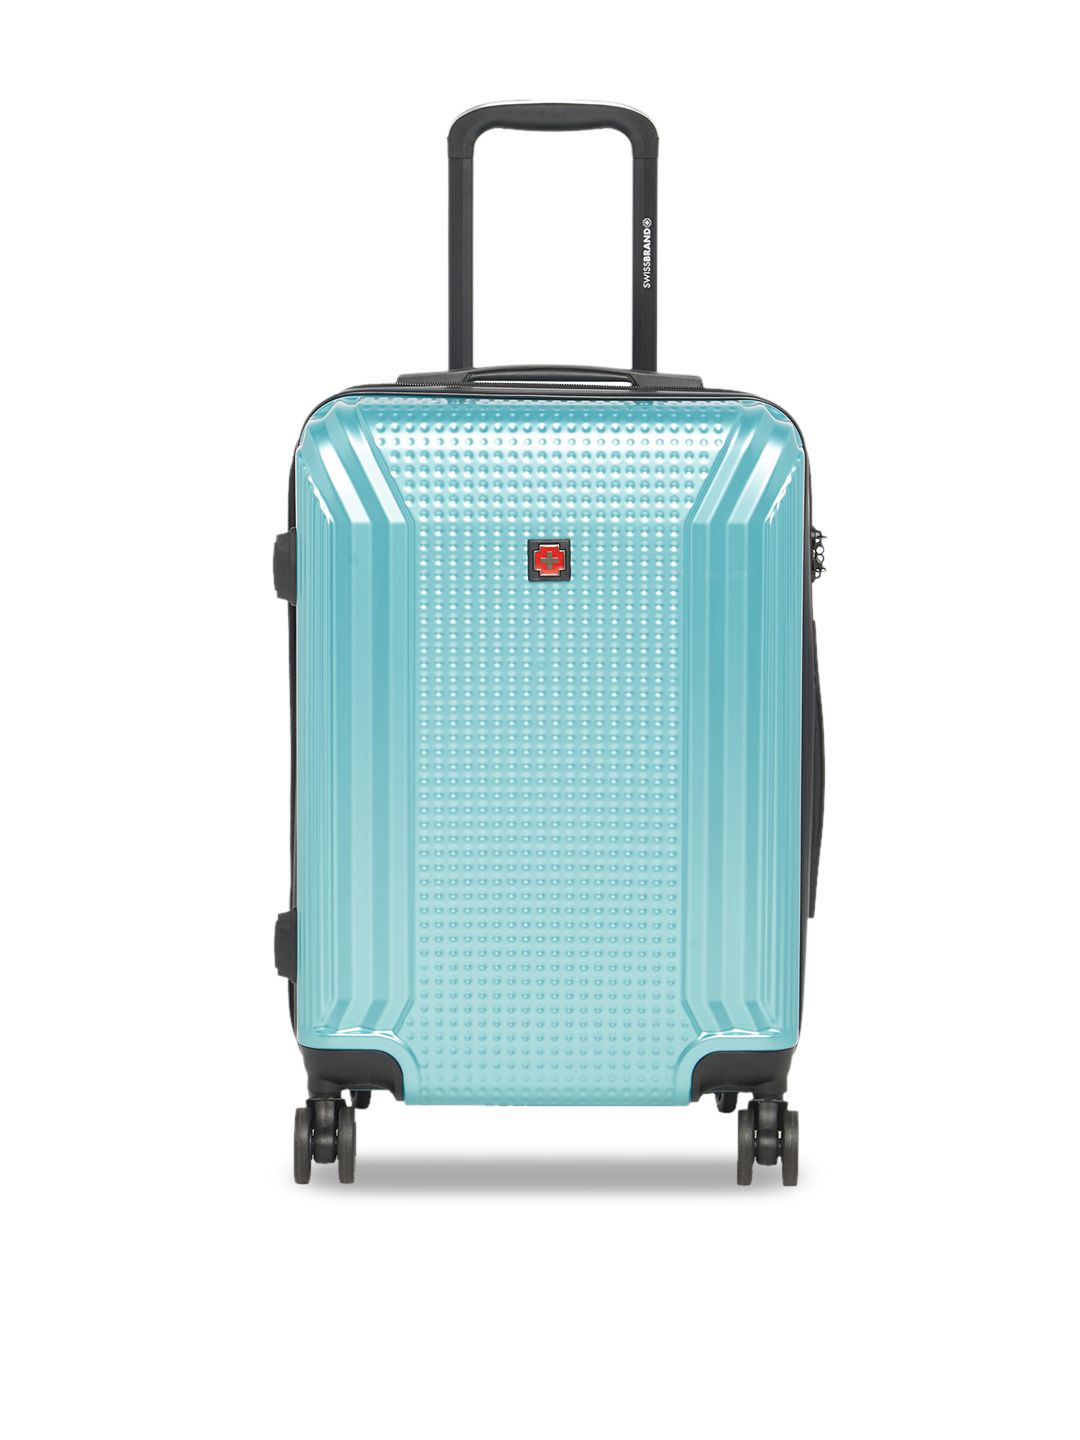 SWISS BRAND Green Textured VERNIER Hard-Sided Cabin Trolley Suitcase Price in India